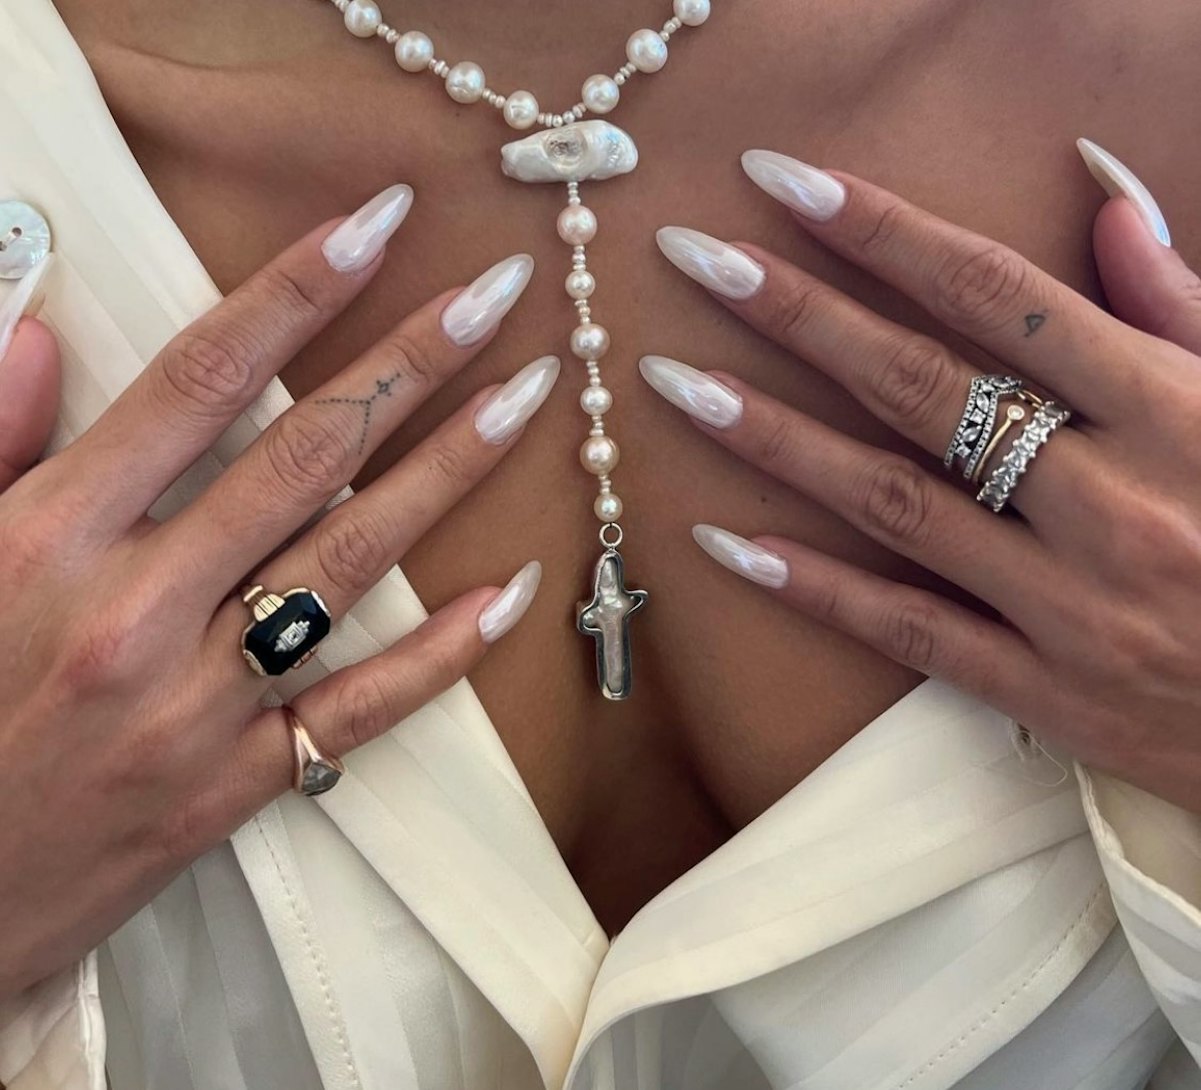 Hailey Bieber's Go-To Gel Nail Colors - wide 7